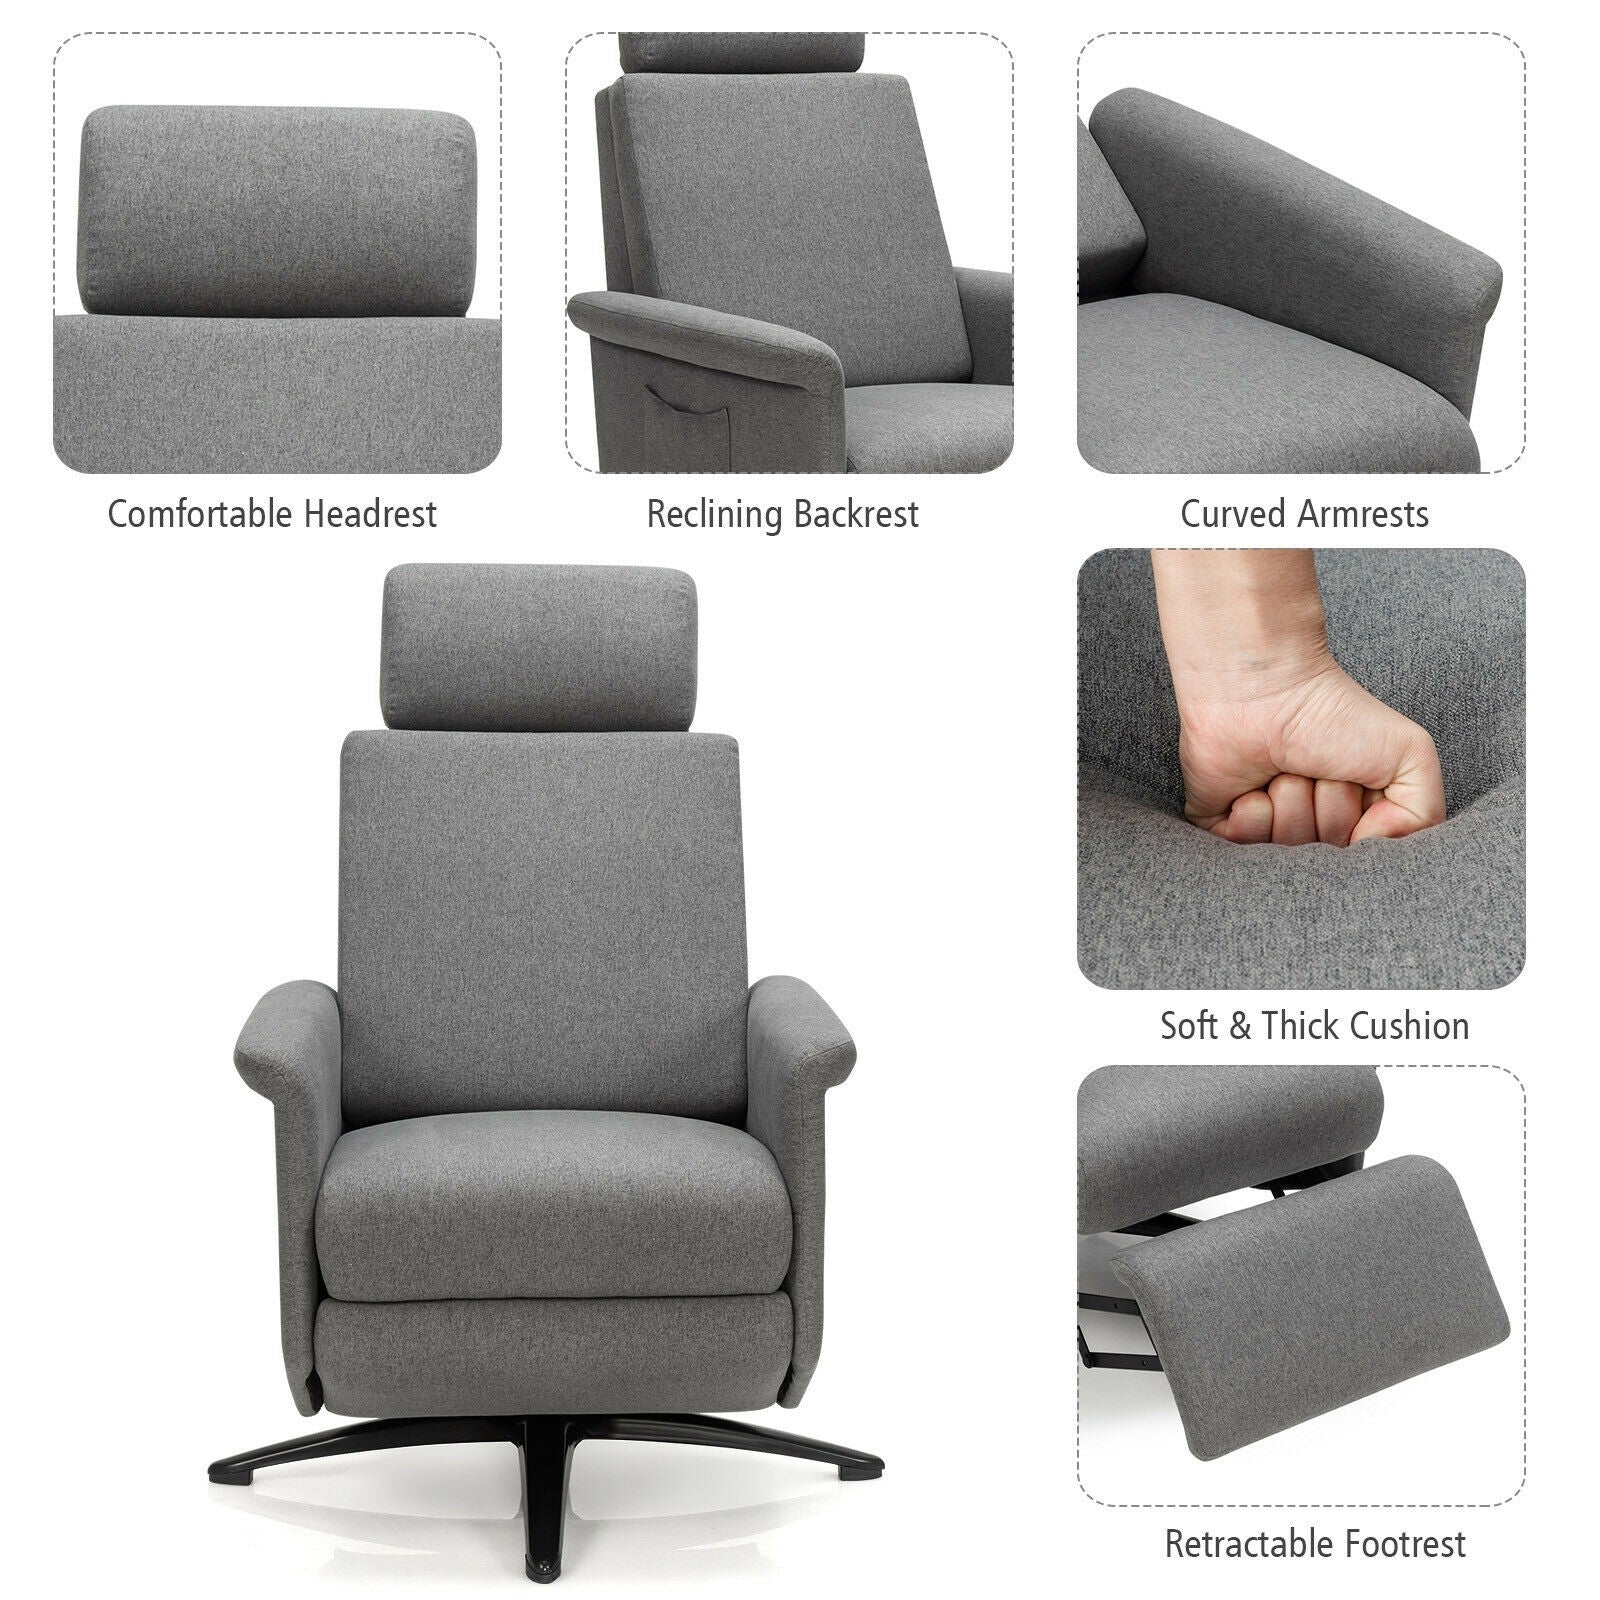 Recliner Chair with Vibration Massage, 360 Degree Swivel Reclining Sofa Chair, Adjustable Headrest & Footrest